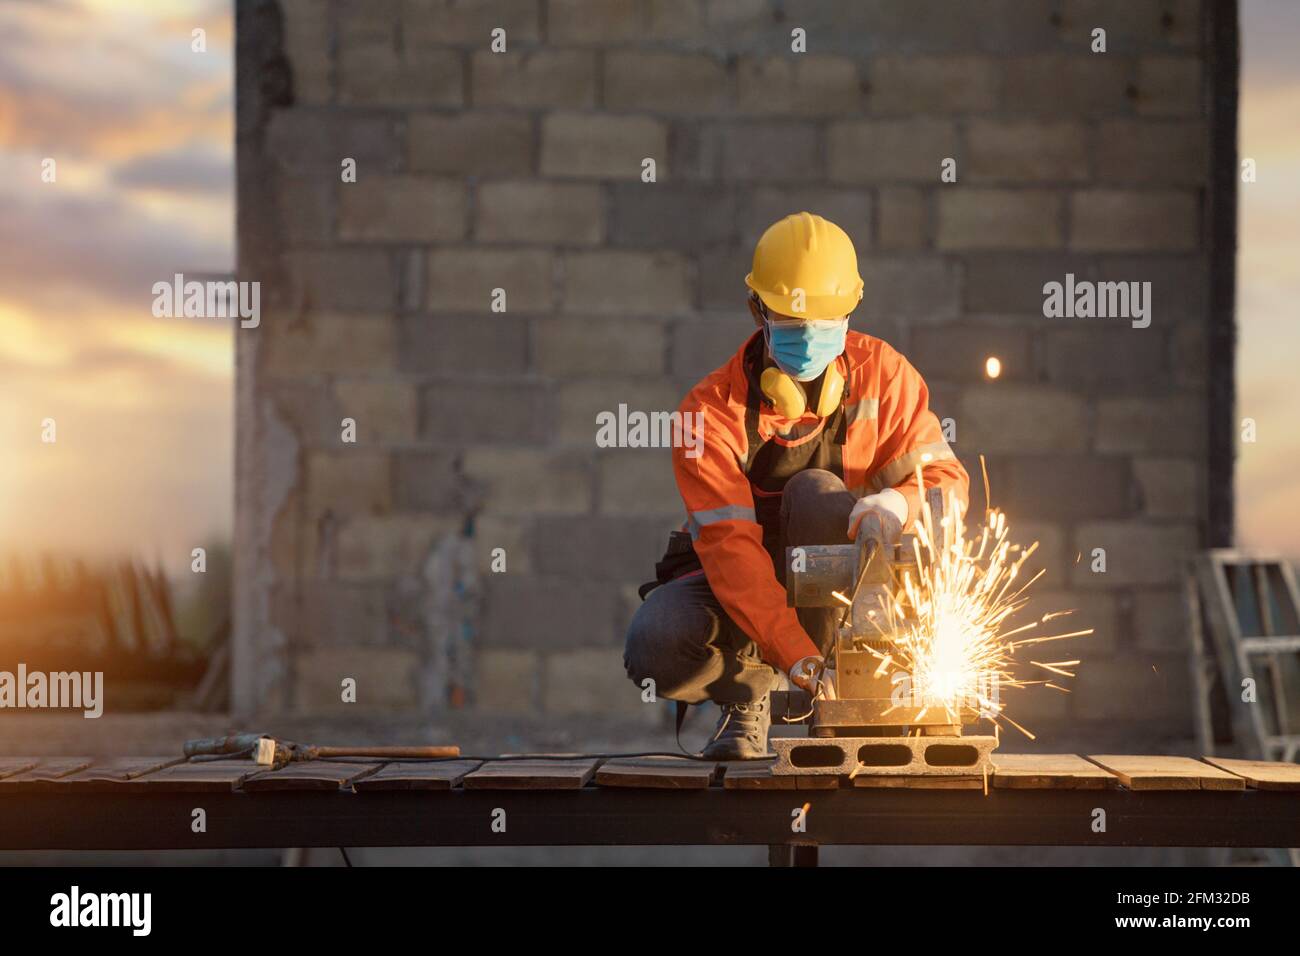 Construction worker using an electric saw on a building site, Thailand Stock Photo